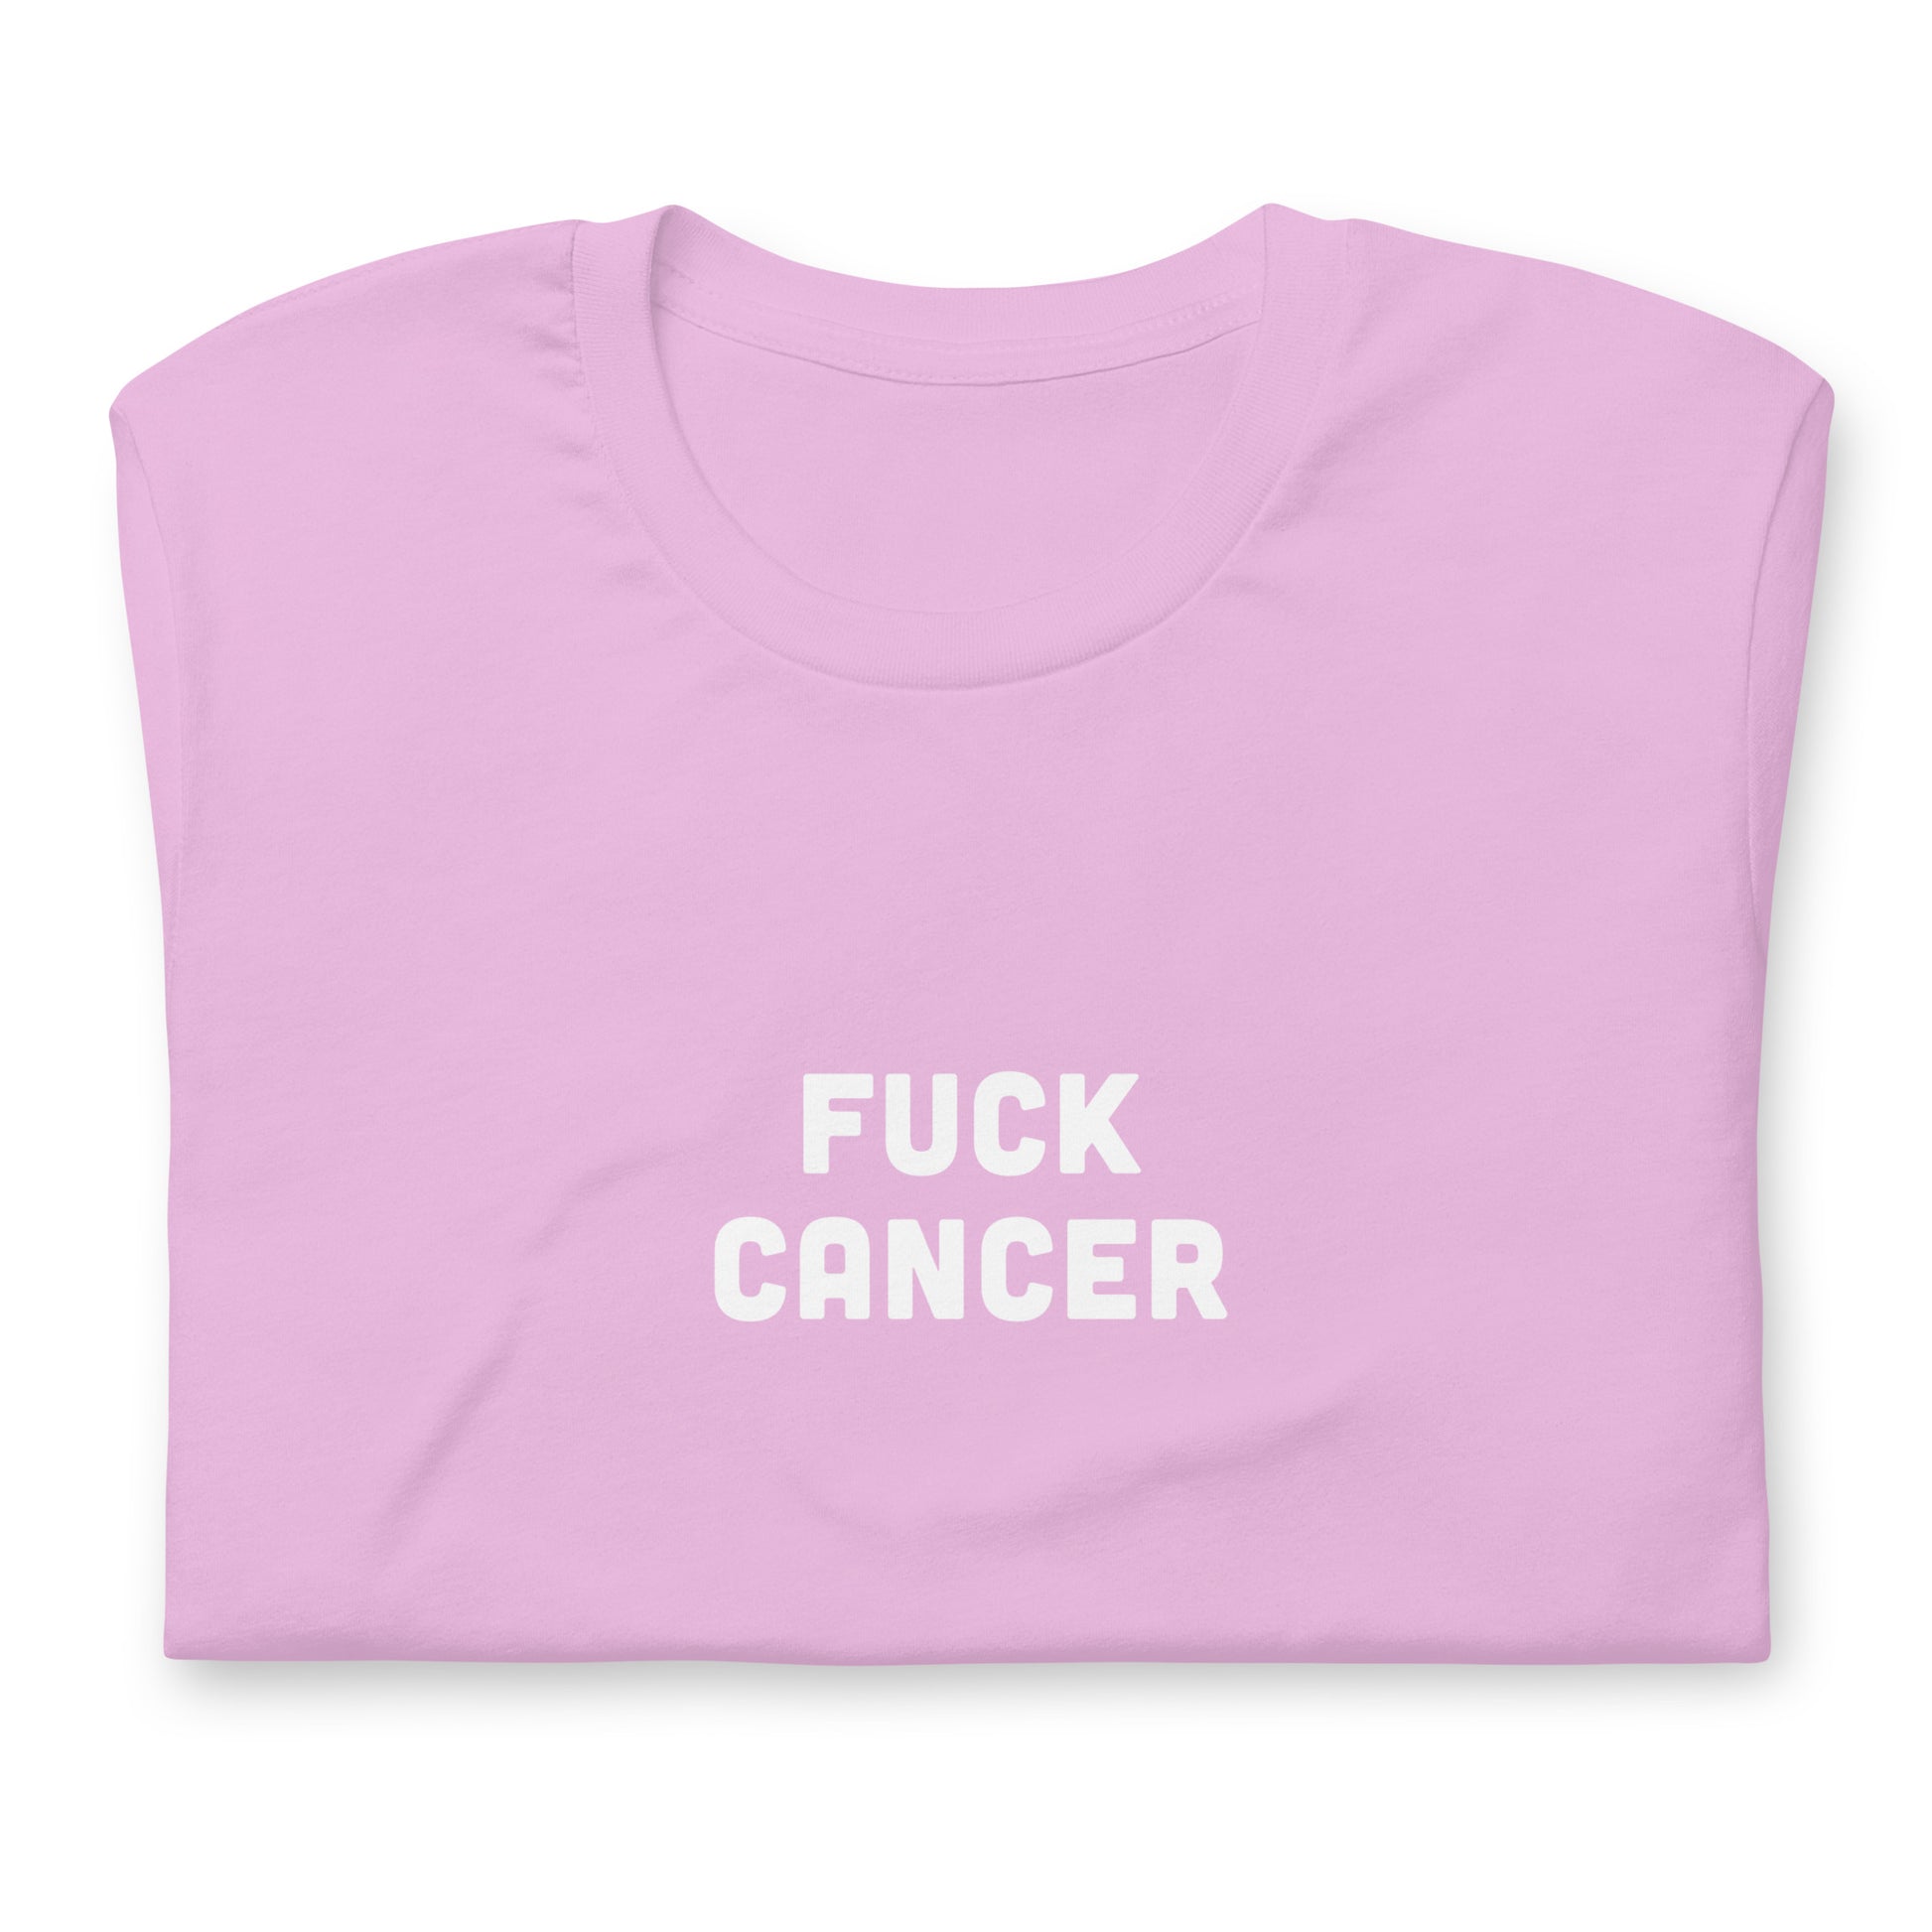 Fuck Cancer T-Shirt Size 2XL Color Forest